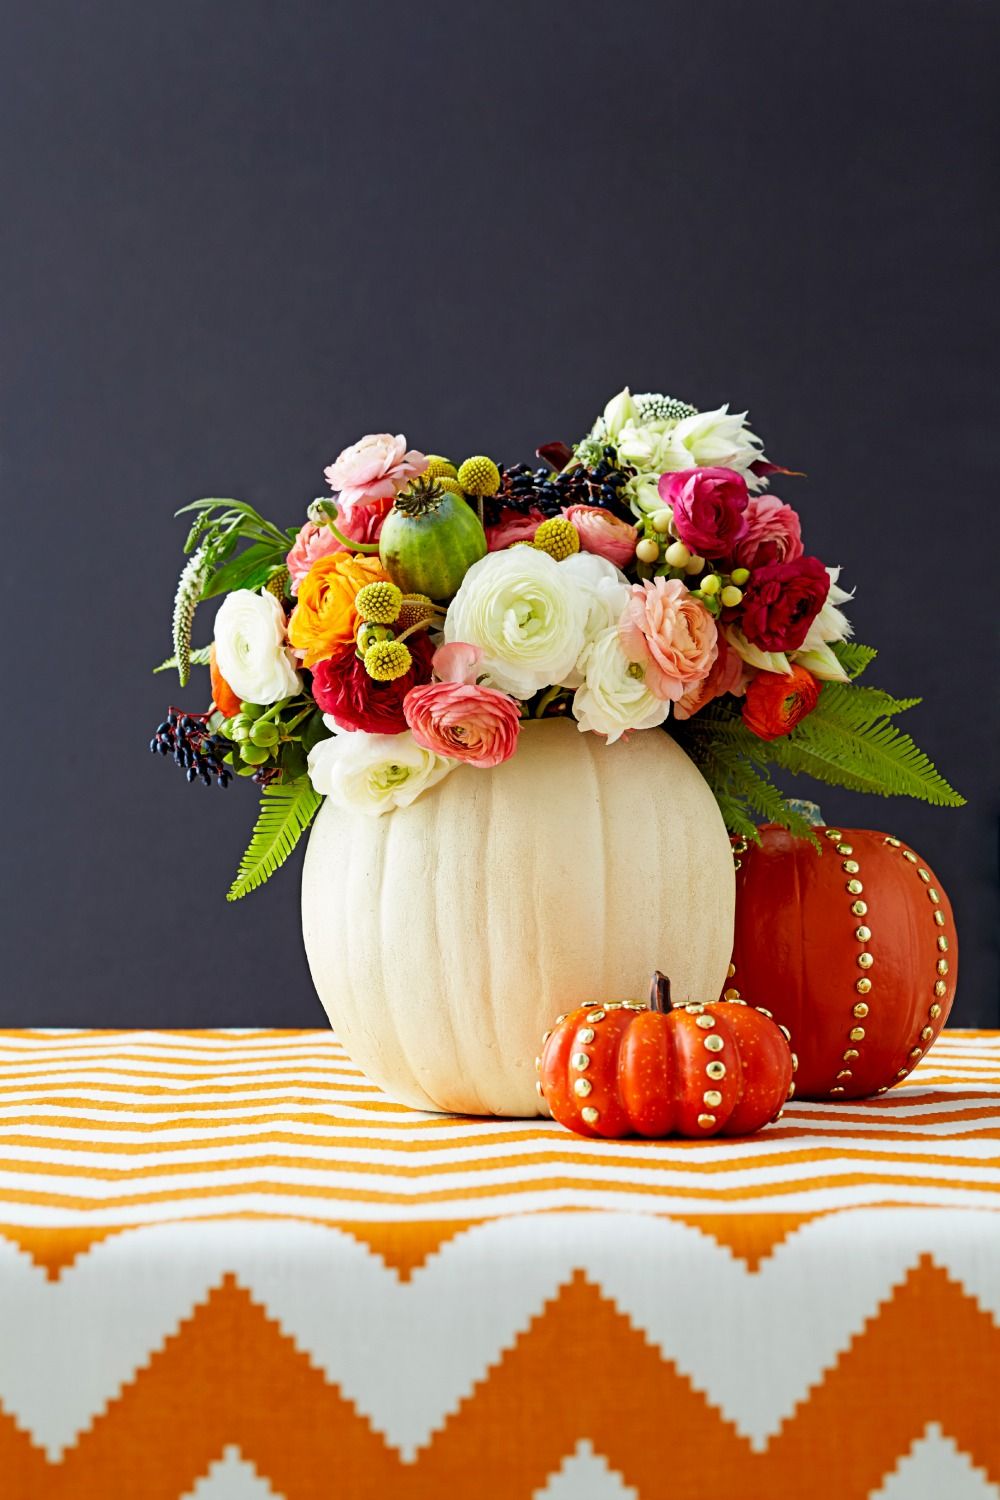 Turn pumpkins into vases for your centerpiece. Source: Good Housekeeping